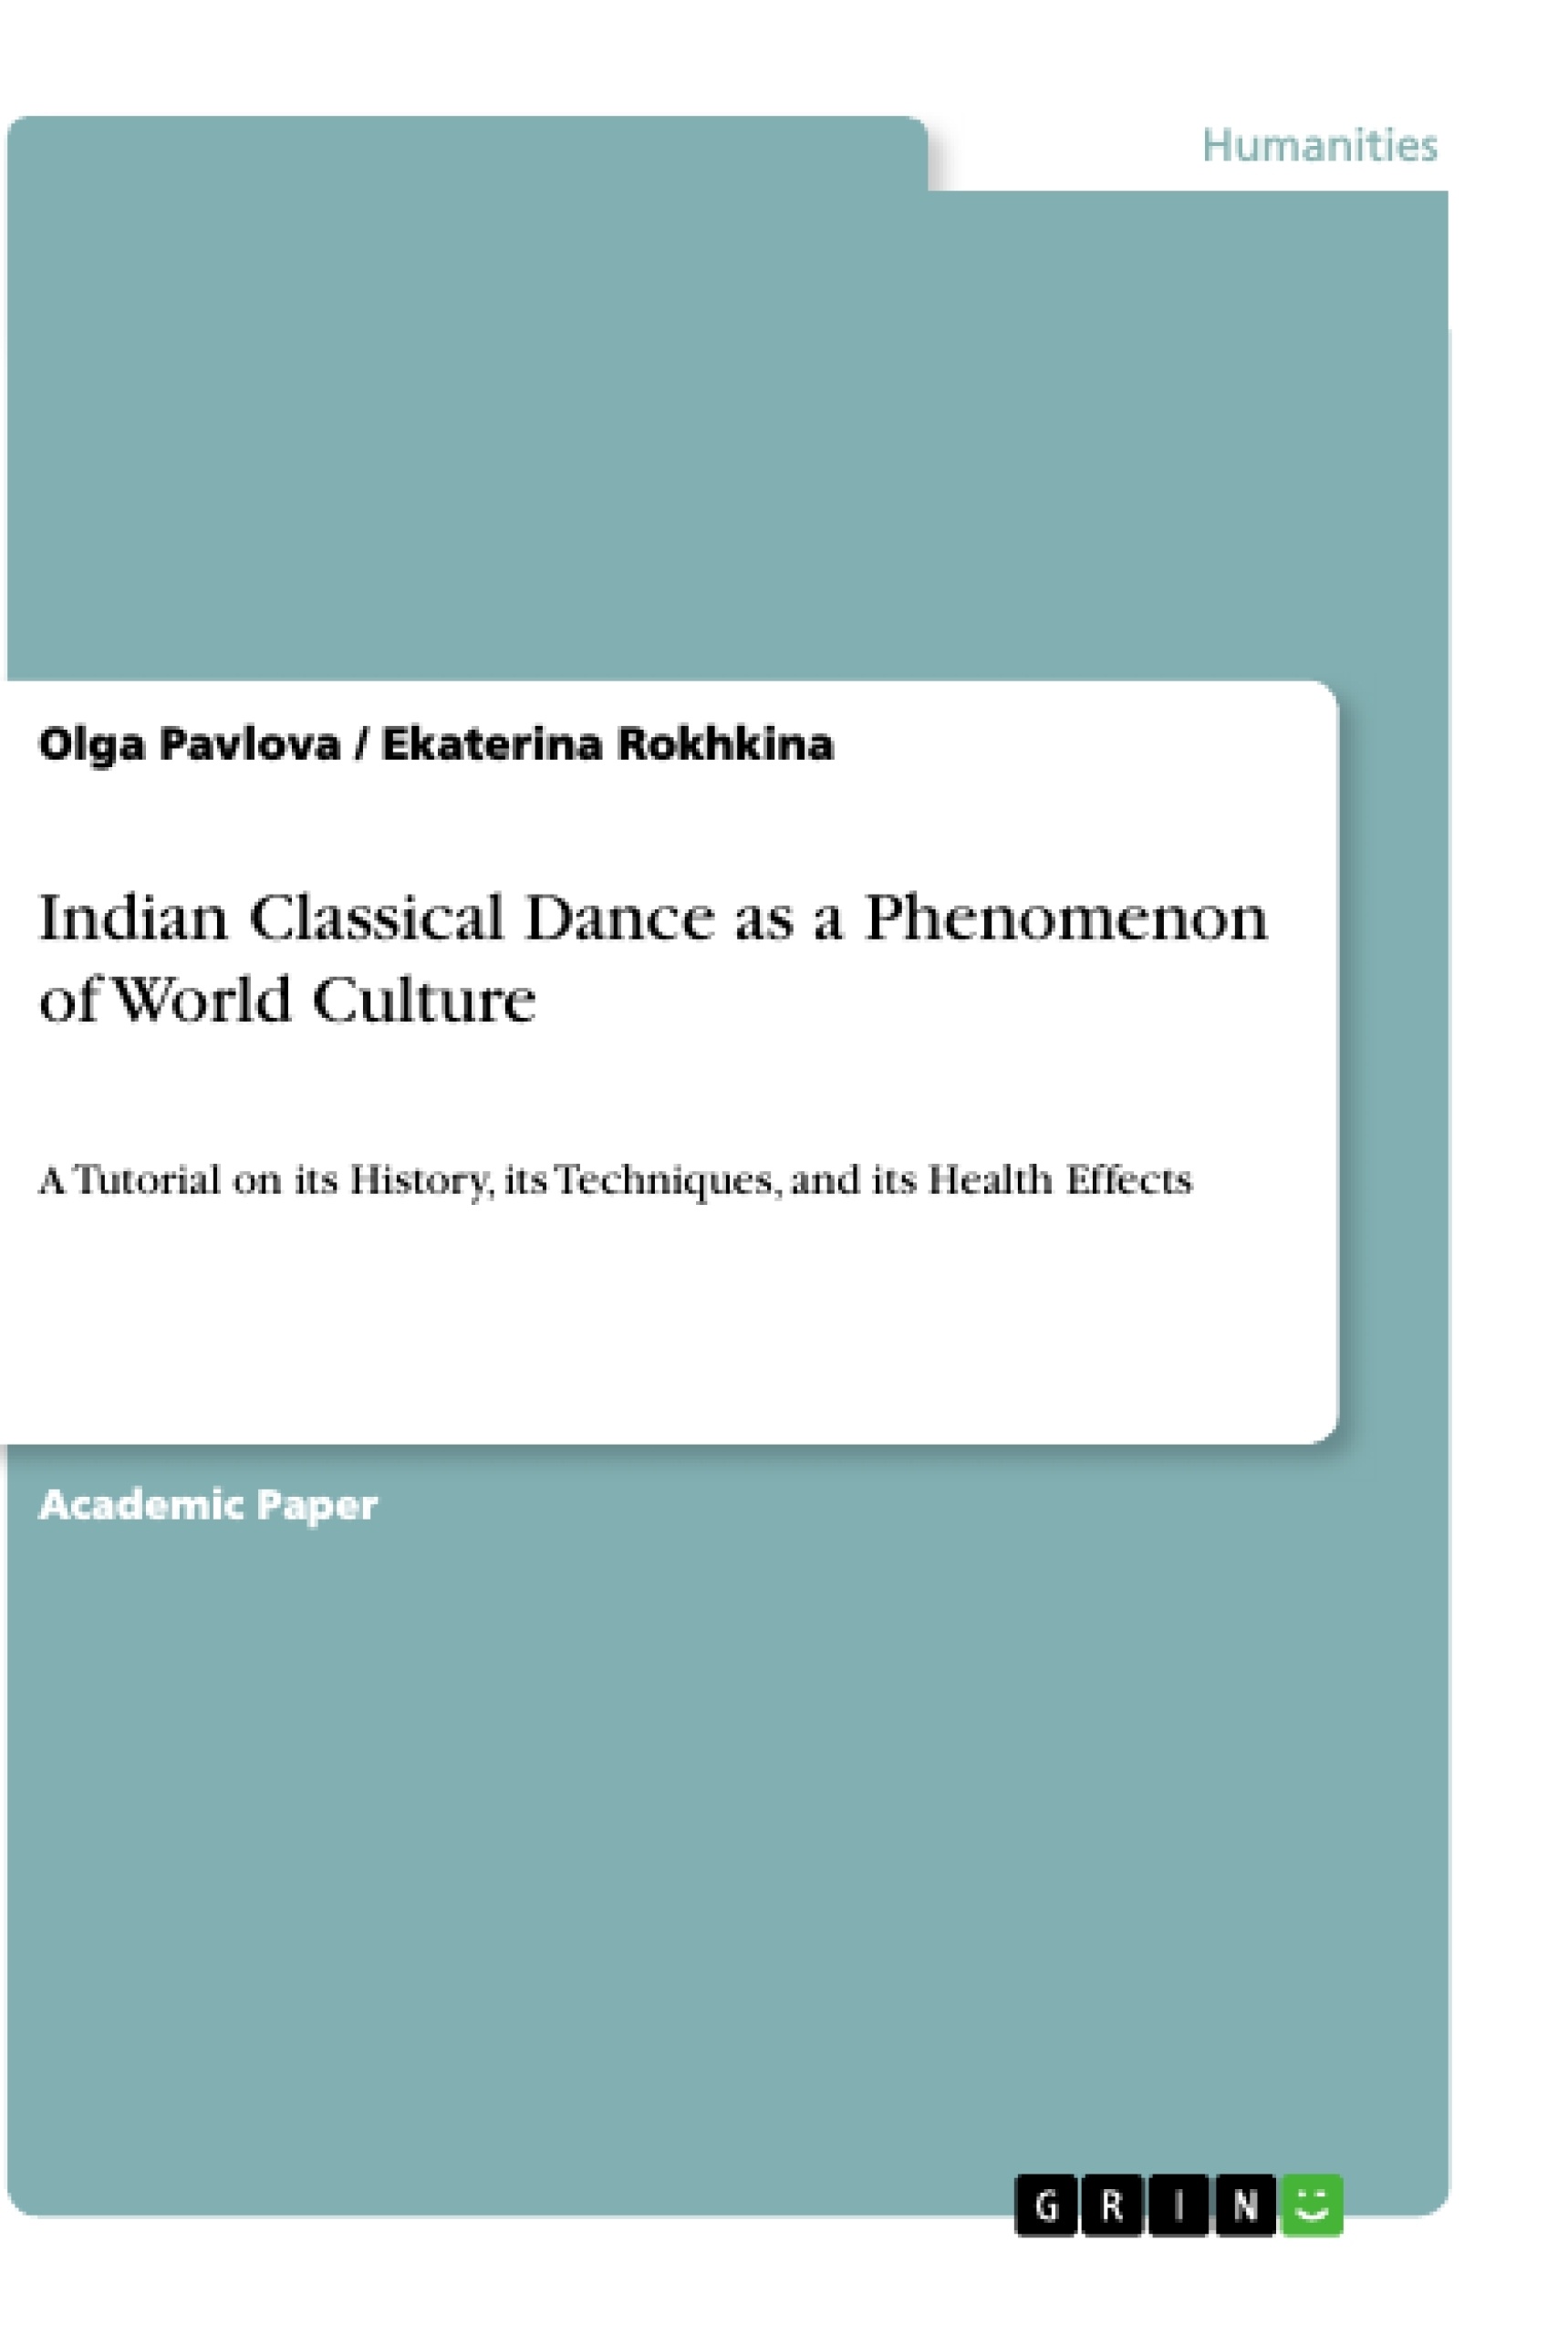 Titel: Indian Classical Dance as a Phenomenon of World Culture